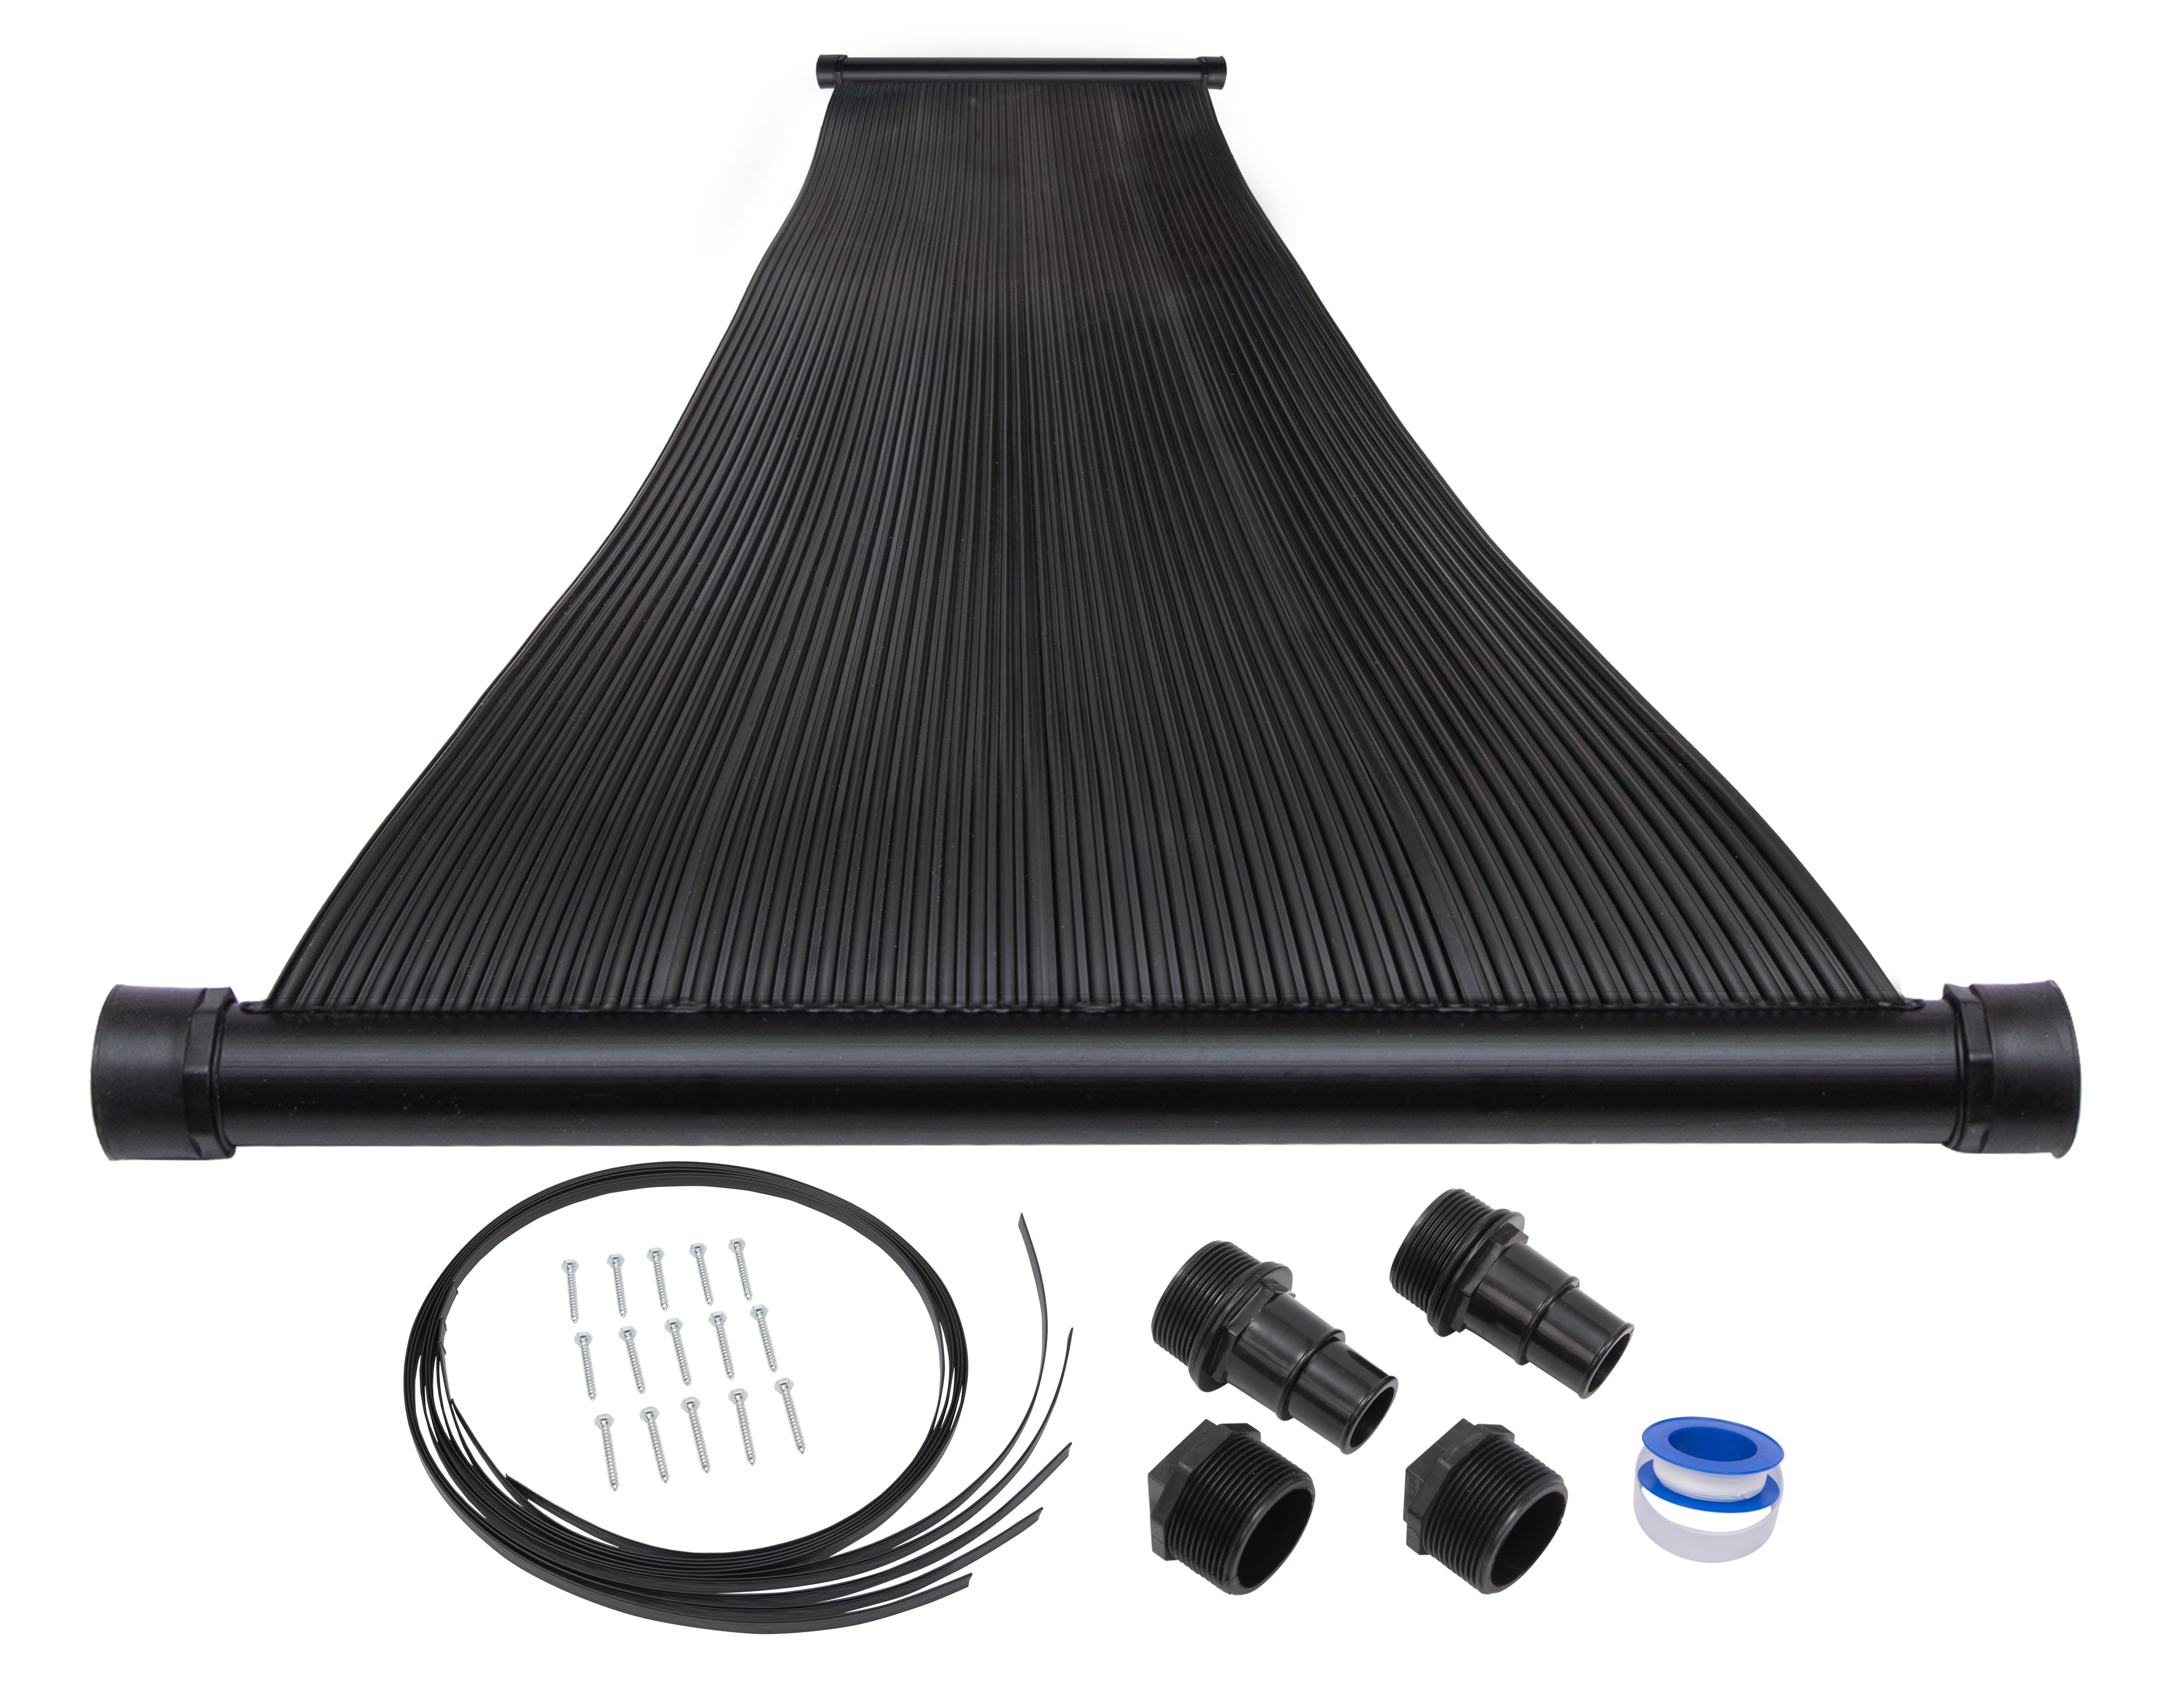 1-2'X12' SunQuest Solar Swimming Pool Heater with Roof/Rack Mounting Kit